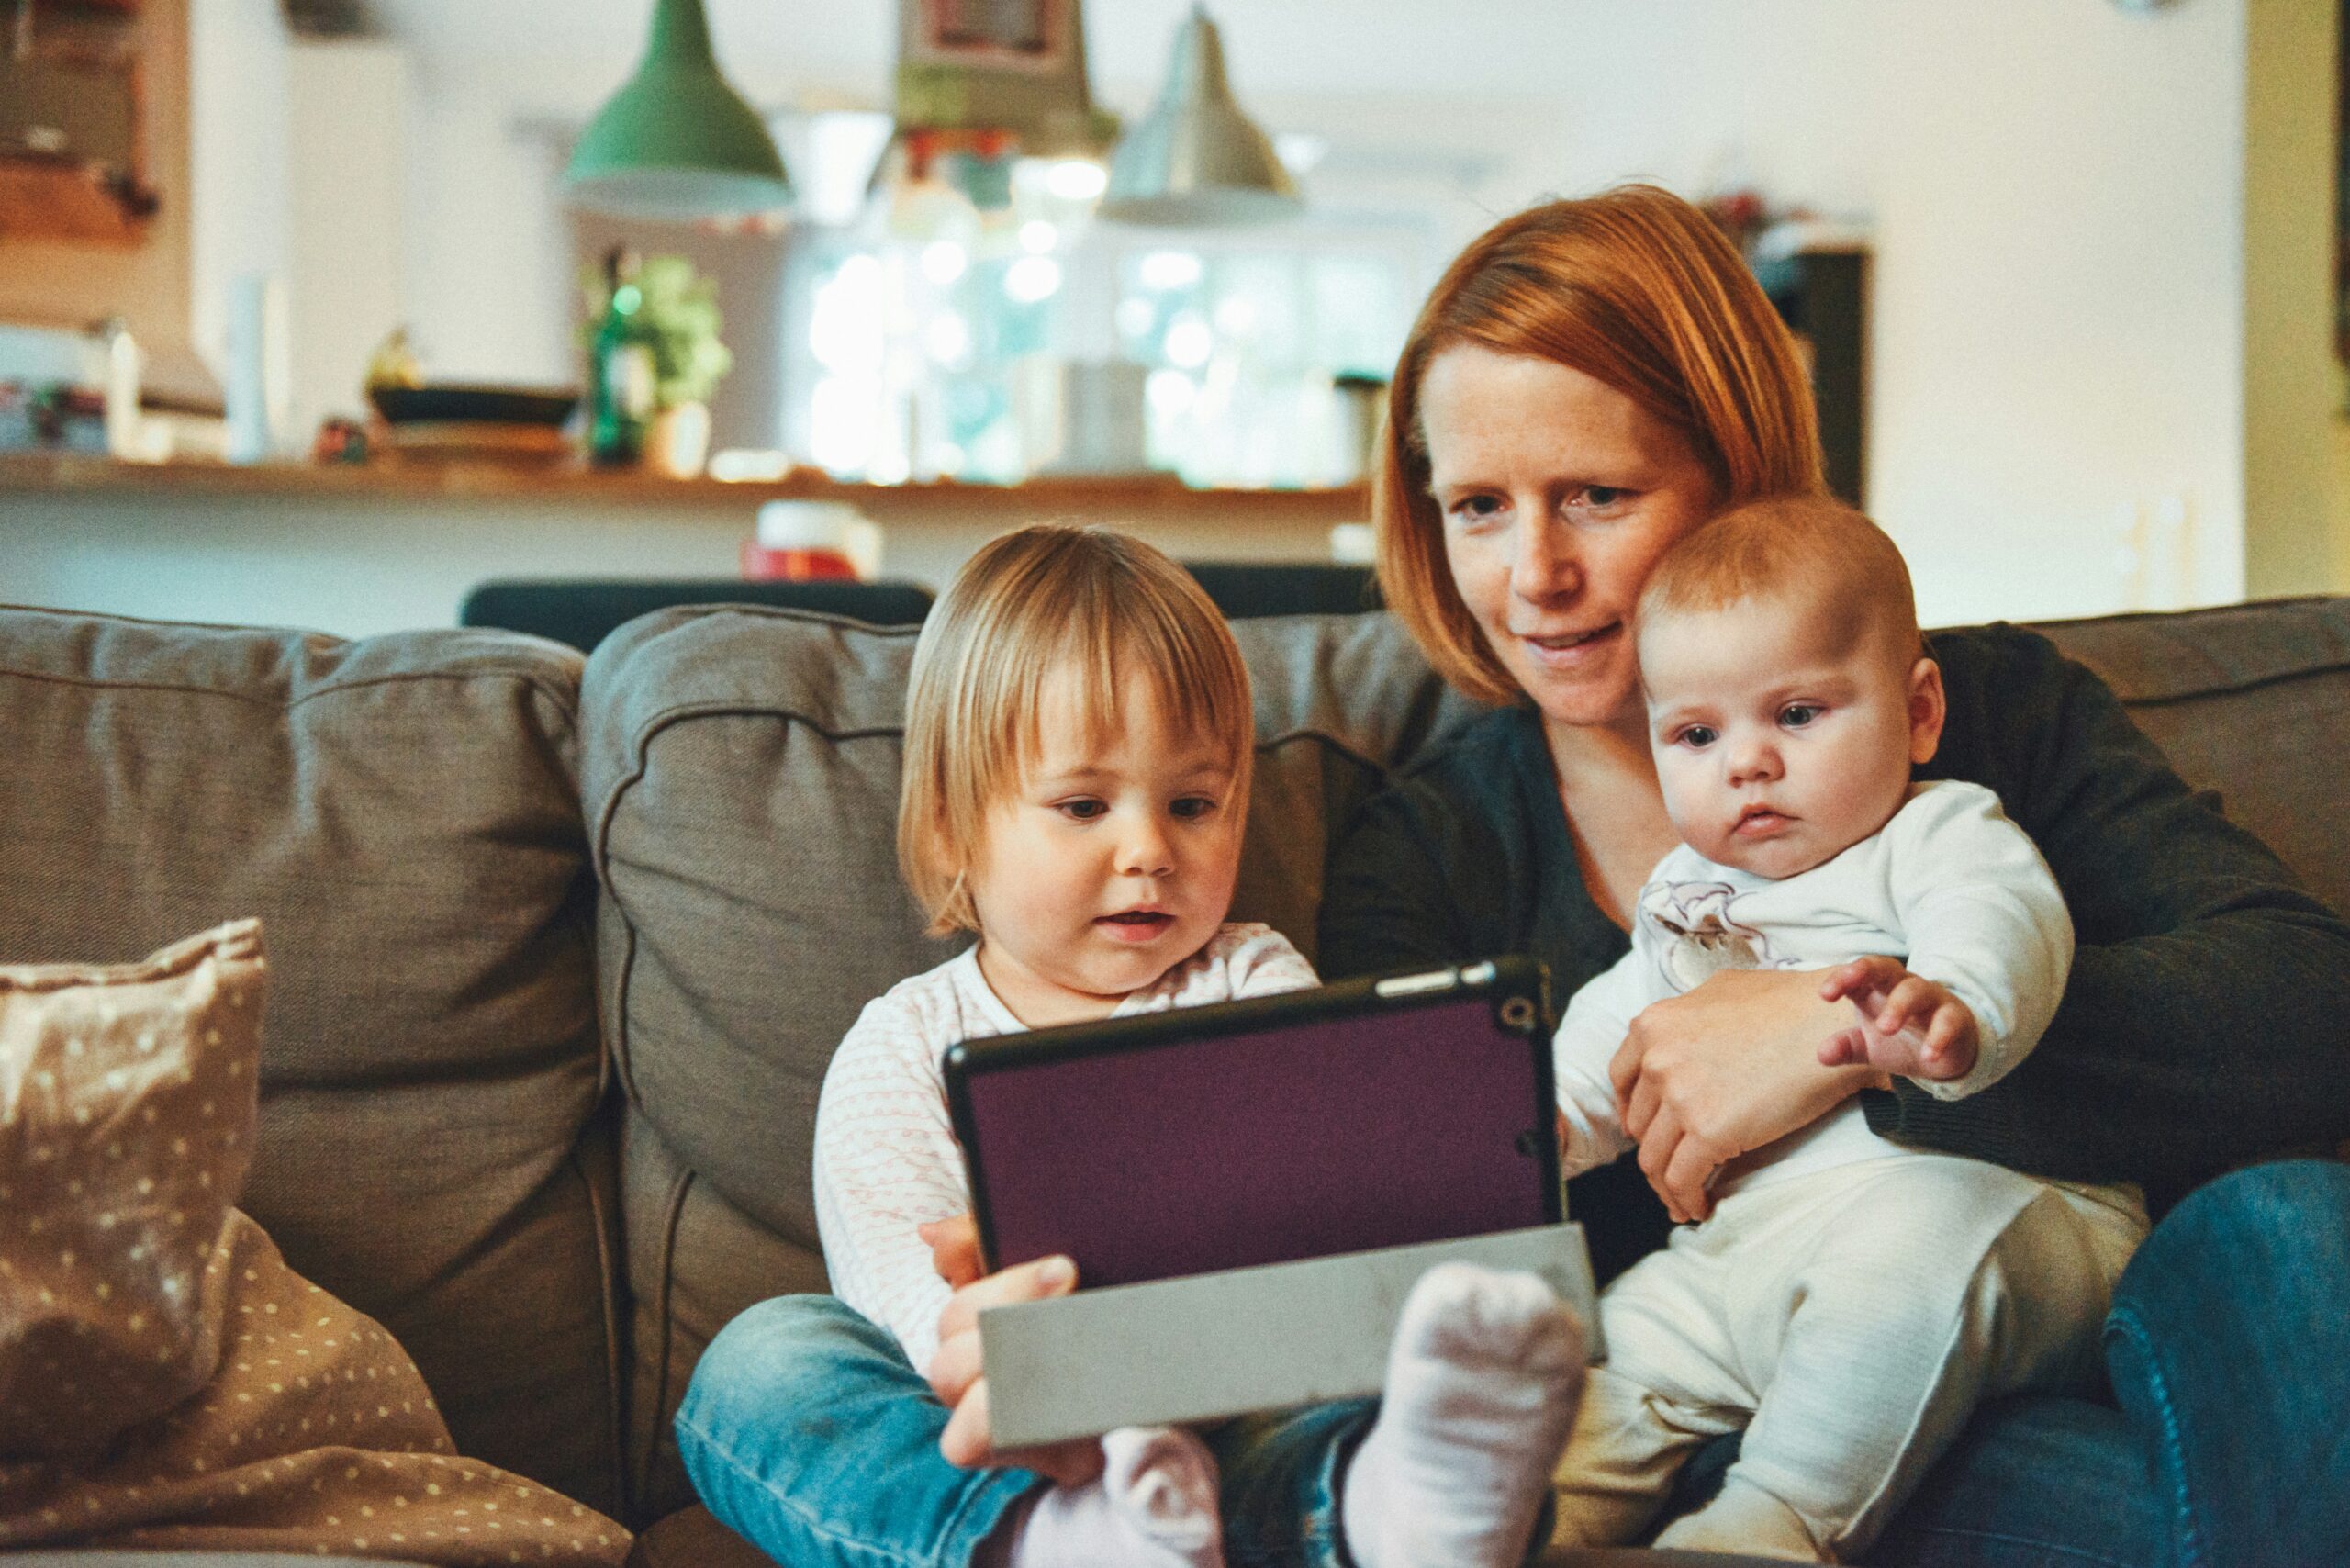 Mother snuggling a baby and toddler on the couch watching a tablet computer.